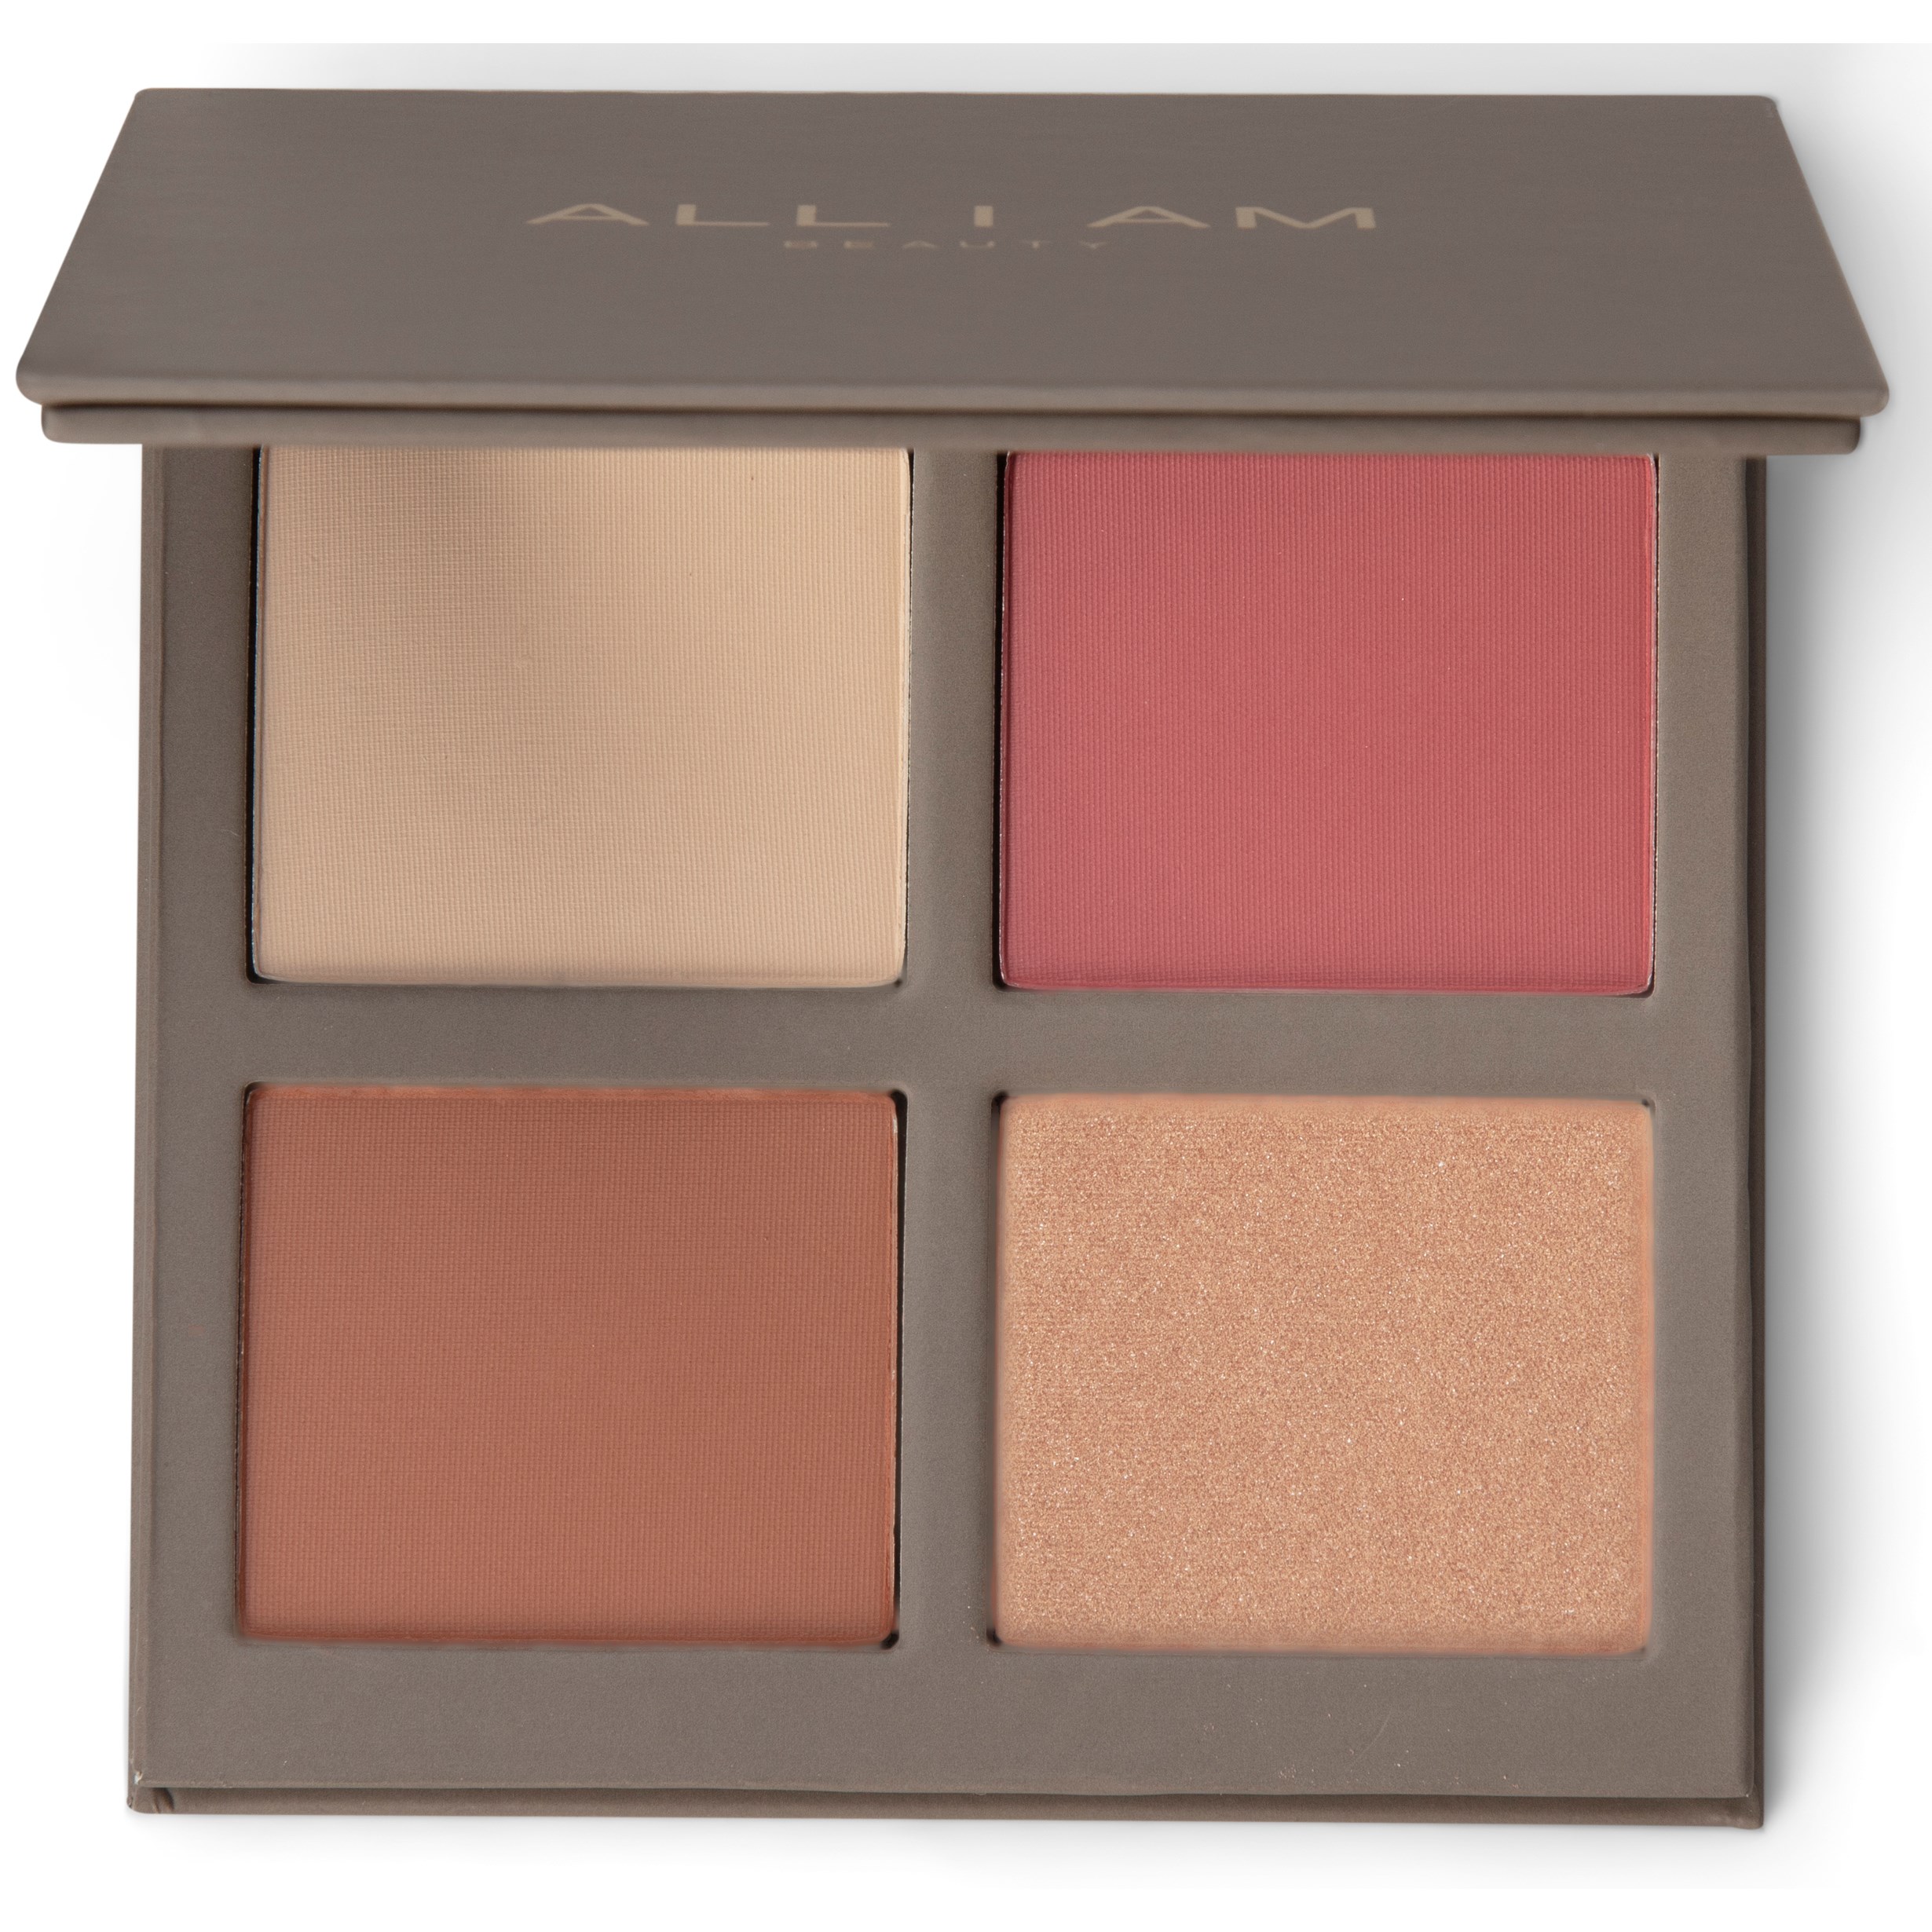 ALL I AM BEAUTY Perfect Multi Palette